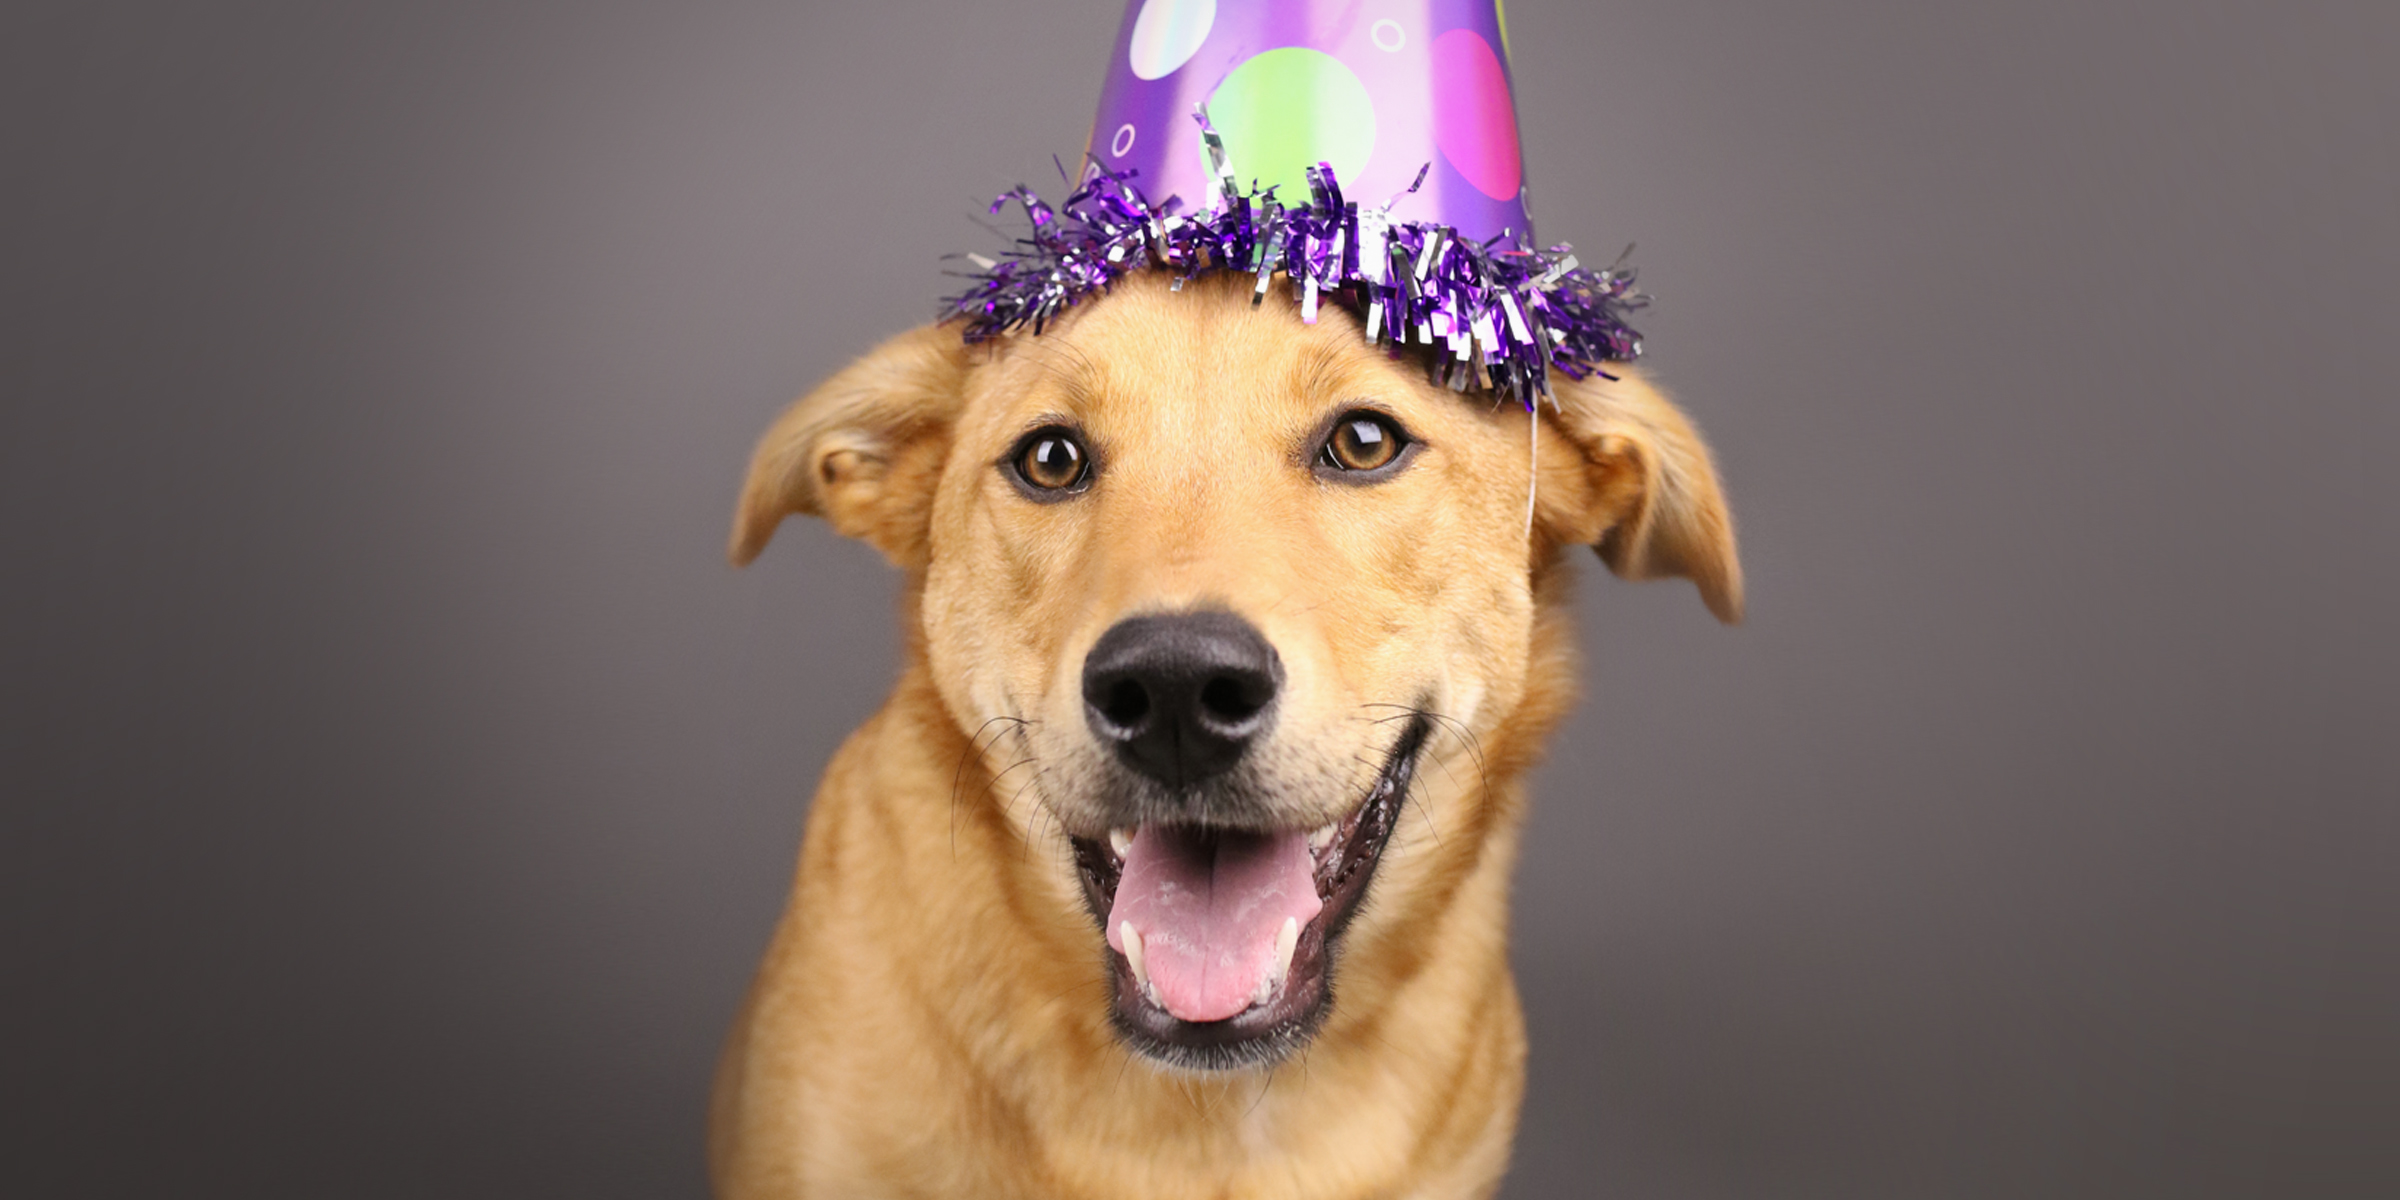 Doggy Birthday Photo Shoot Party | AGoldPhoto Pet Photography